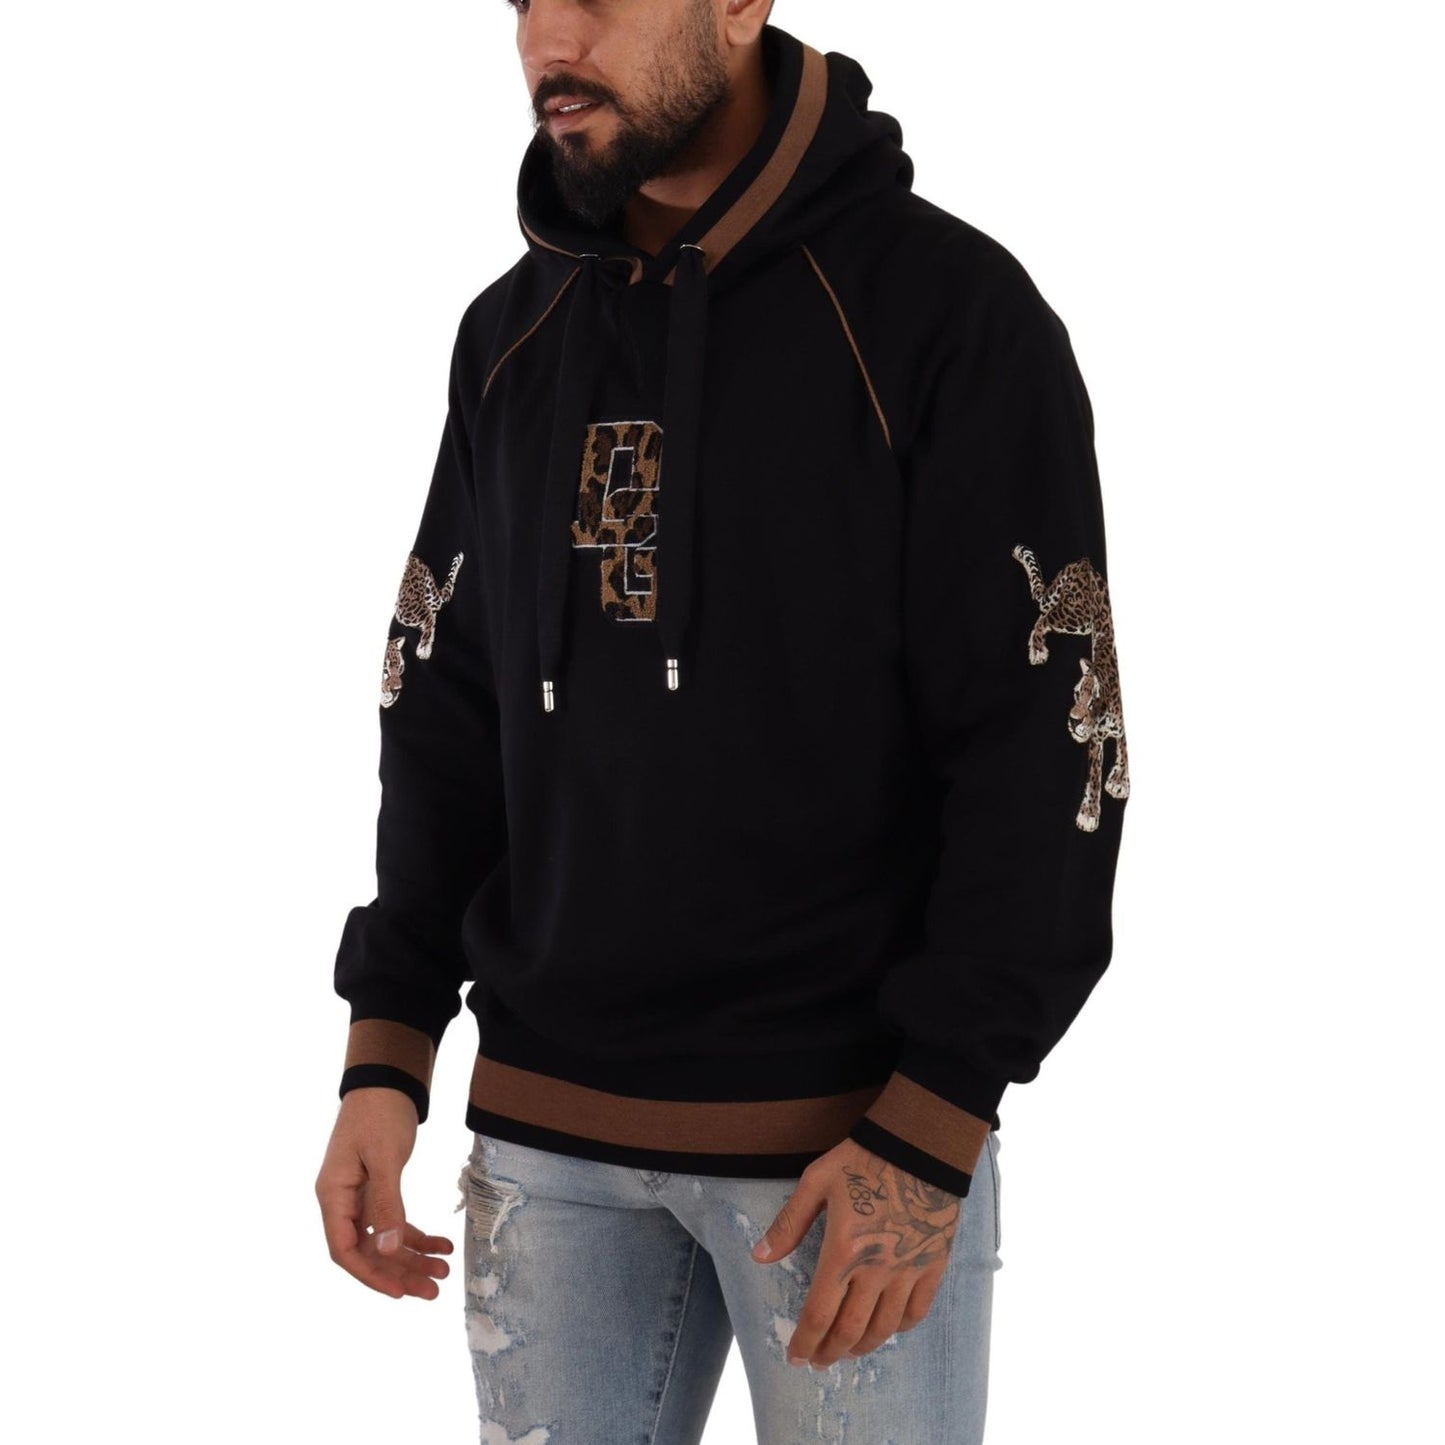 Dolce & Gabbana Chic Leopard Motive Hooded Sweater black-brown-leopard-cotton-hooded-pullover-sweater